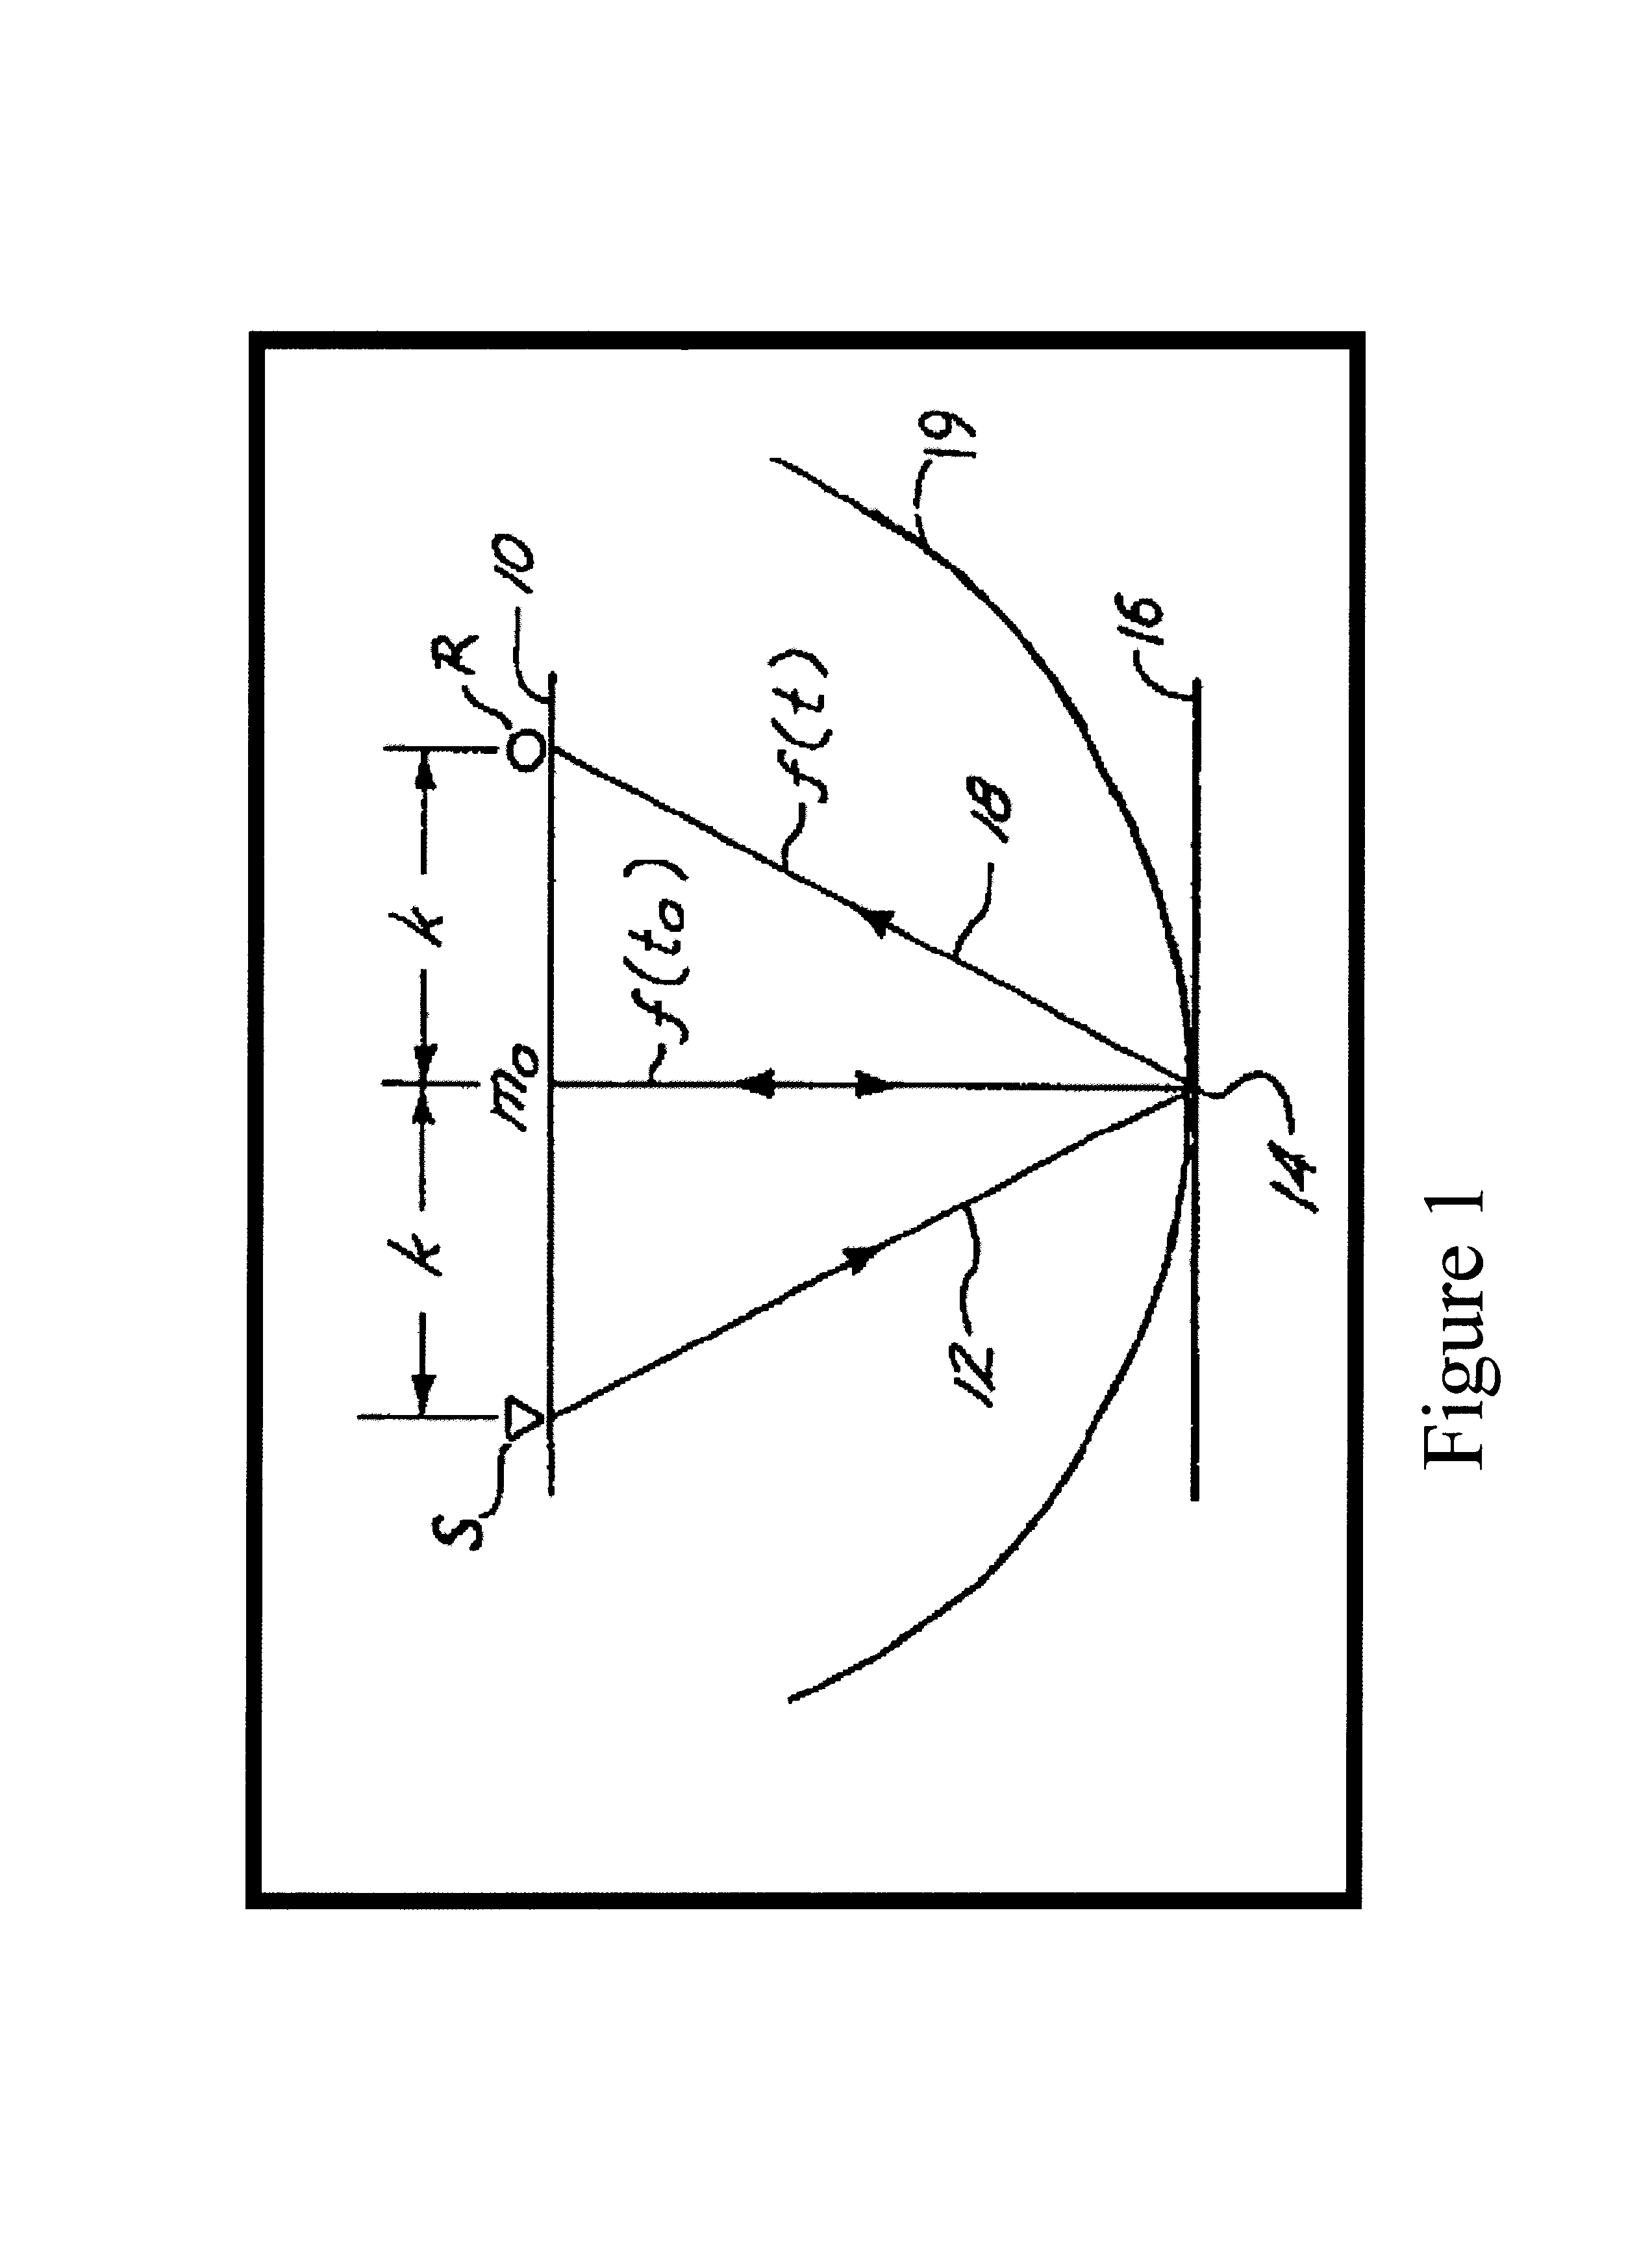 Method of building and updating an anisotropic velocity model for depth imaging of seismic data